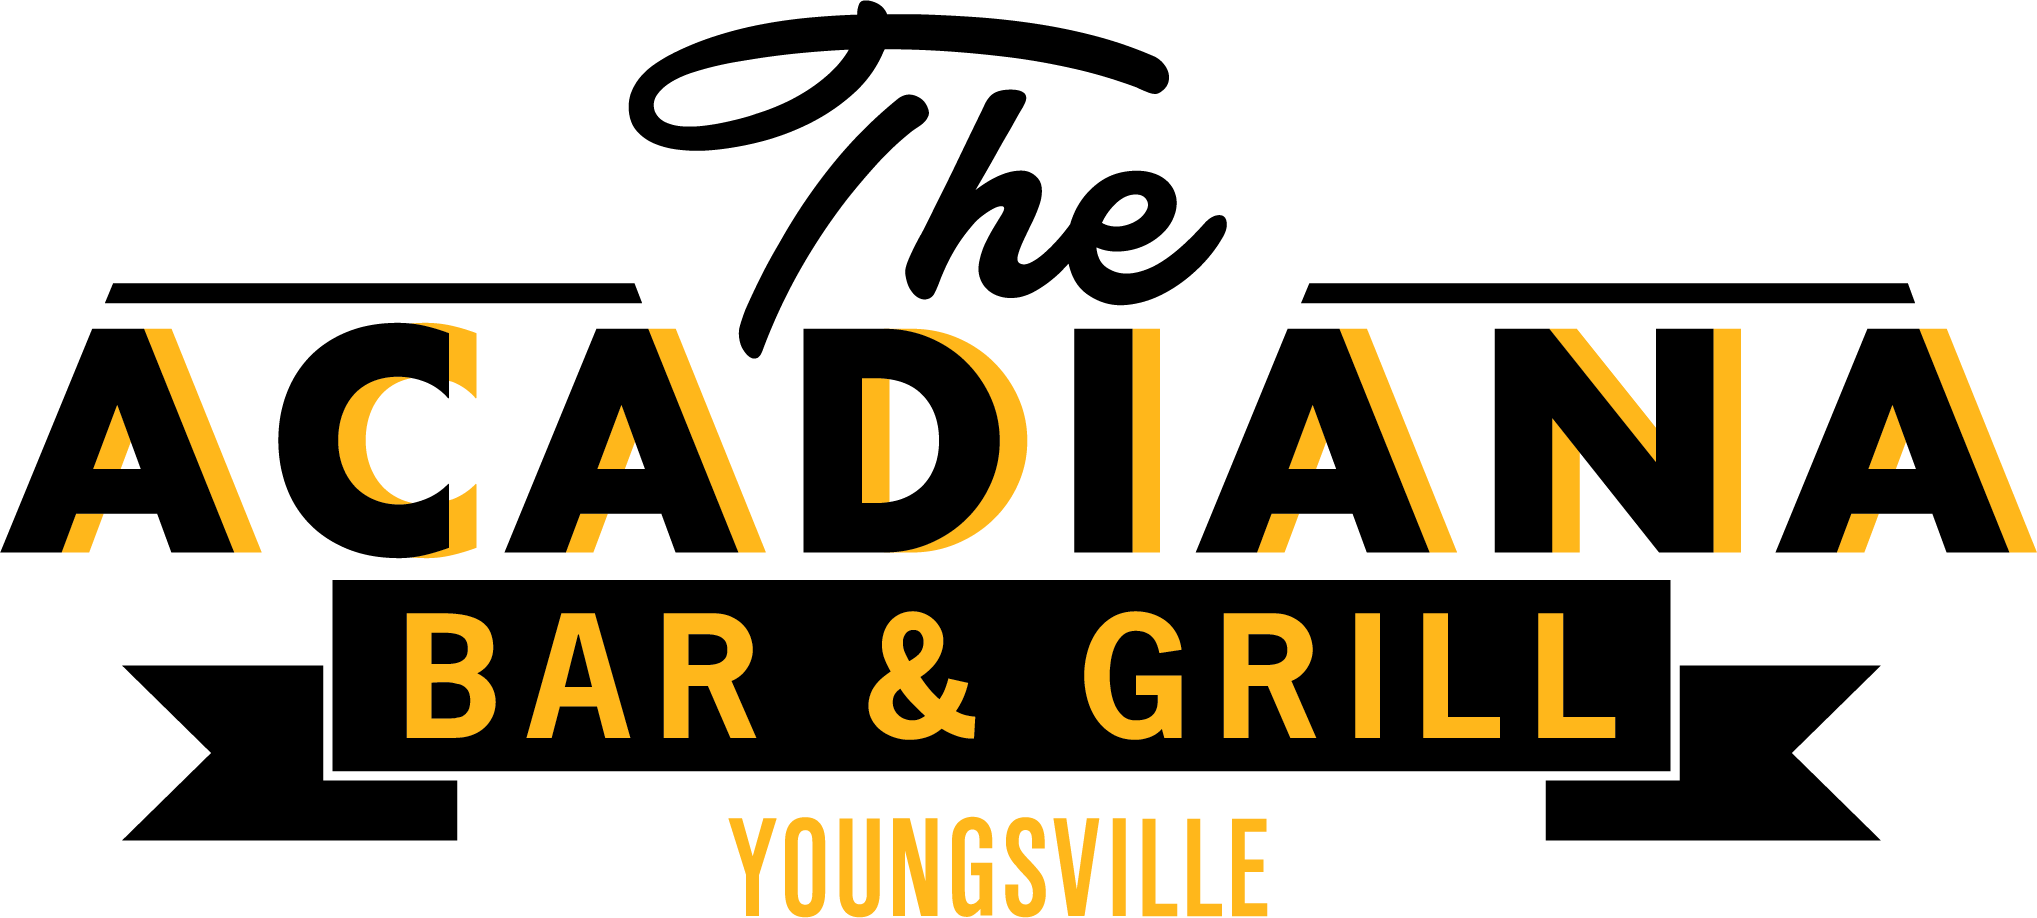 The Acadiana Bar & Grill 327 Iberia St. Suite 1